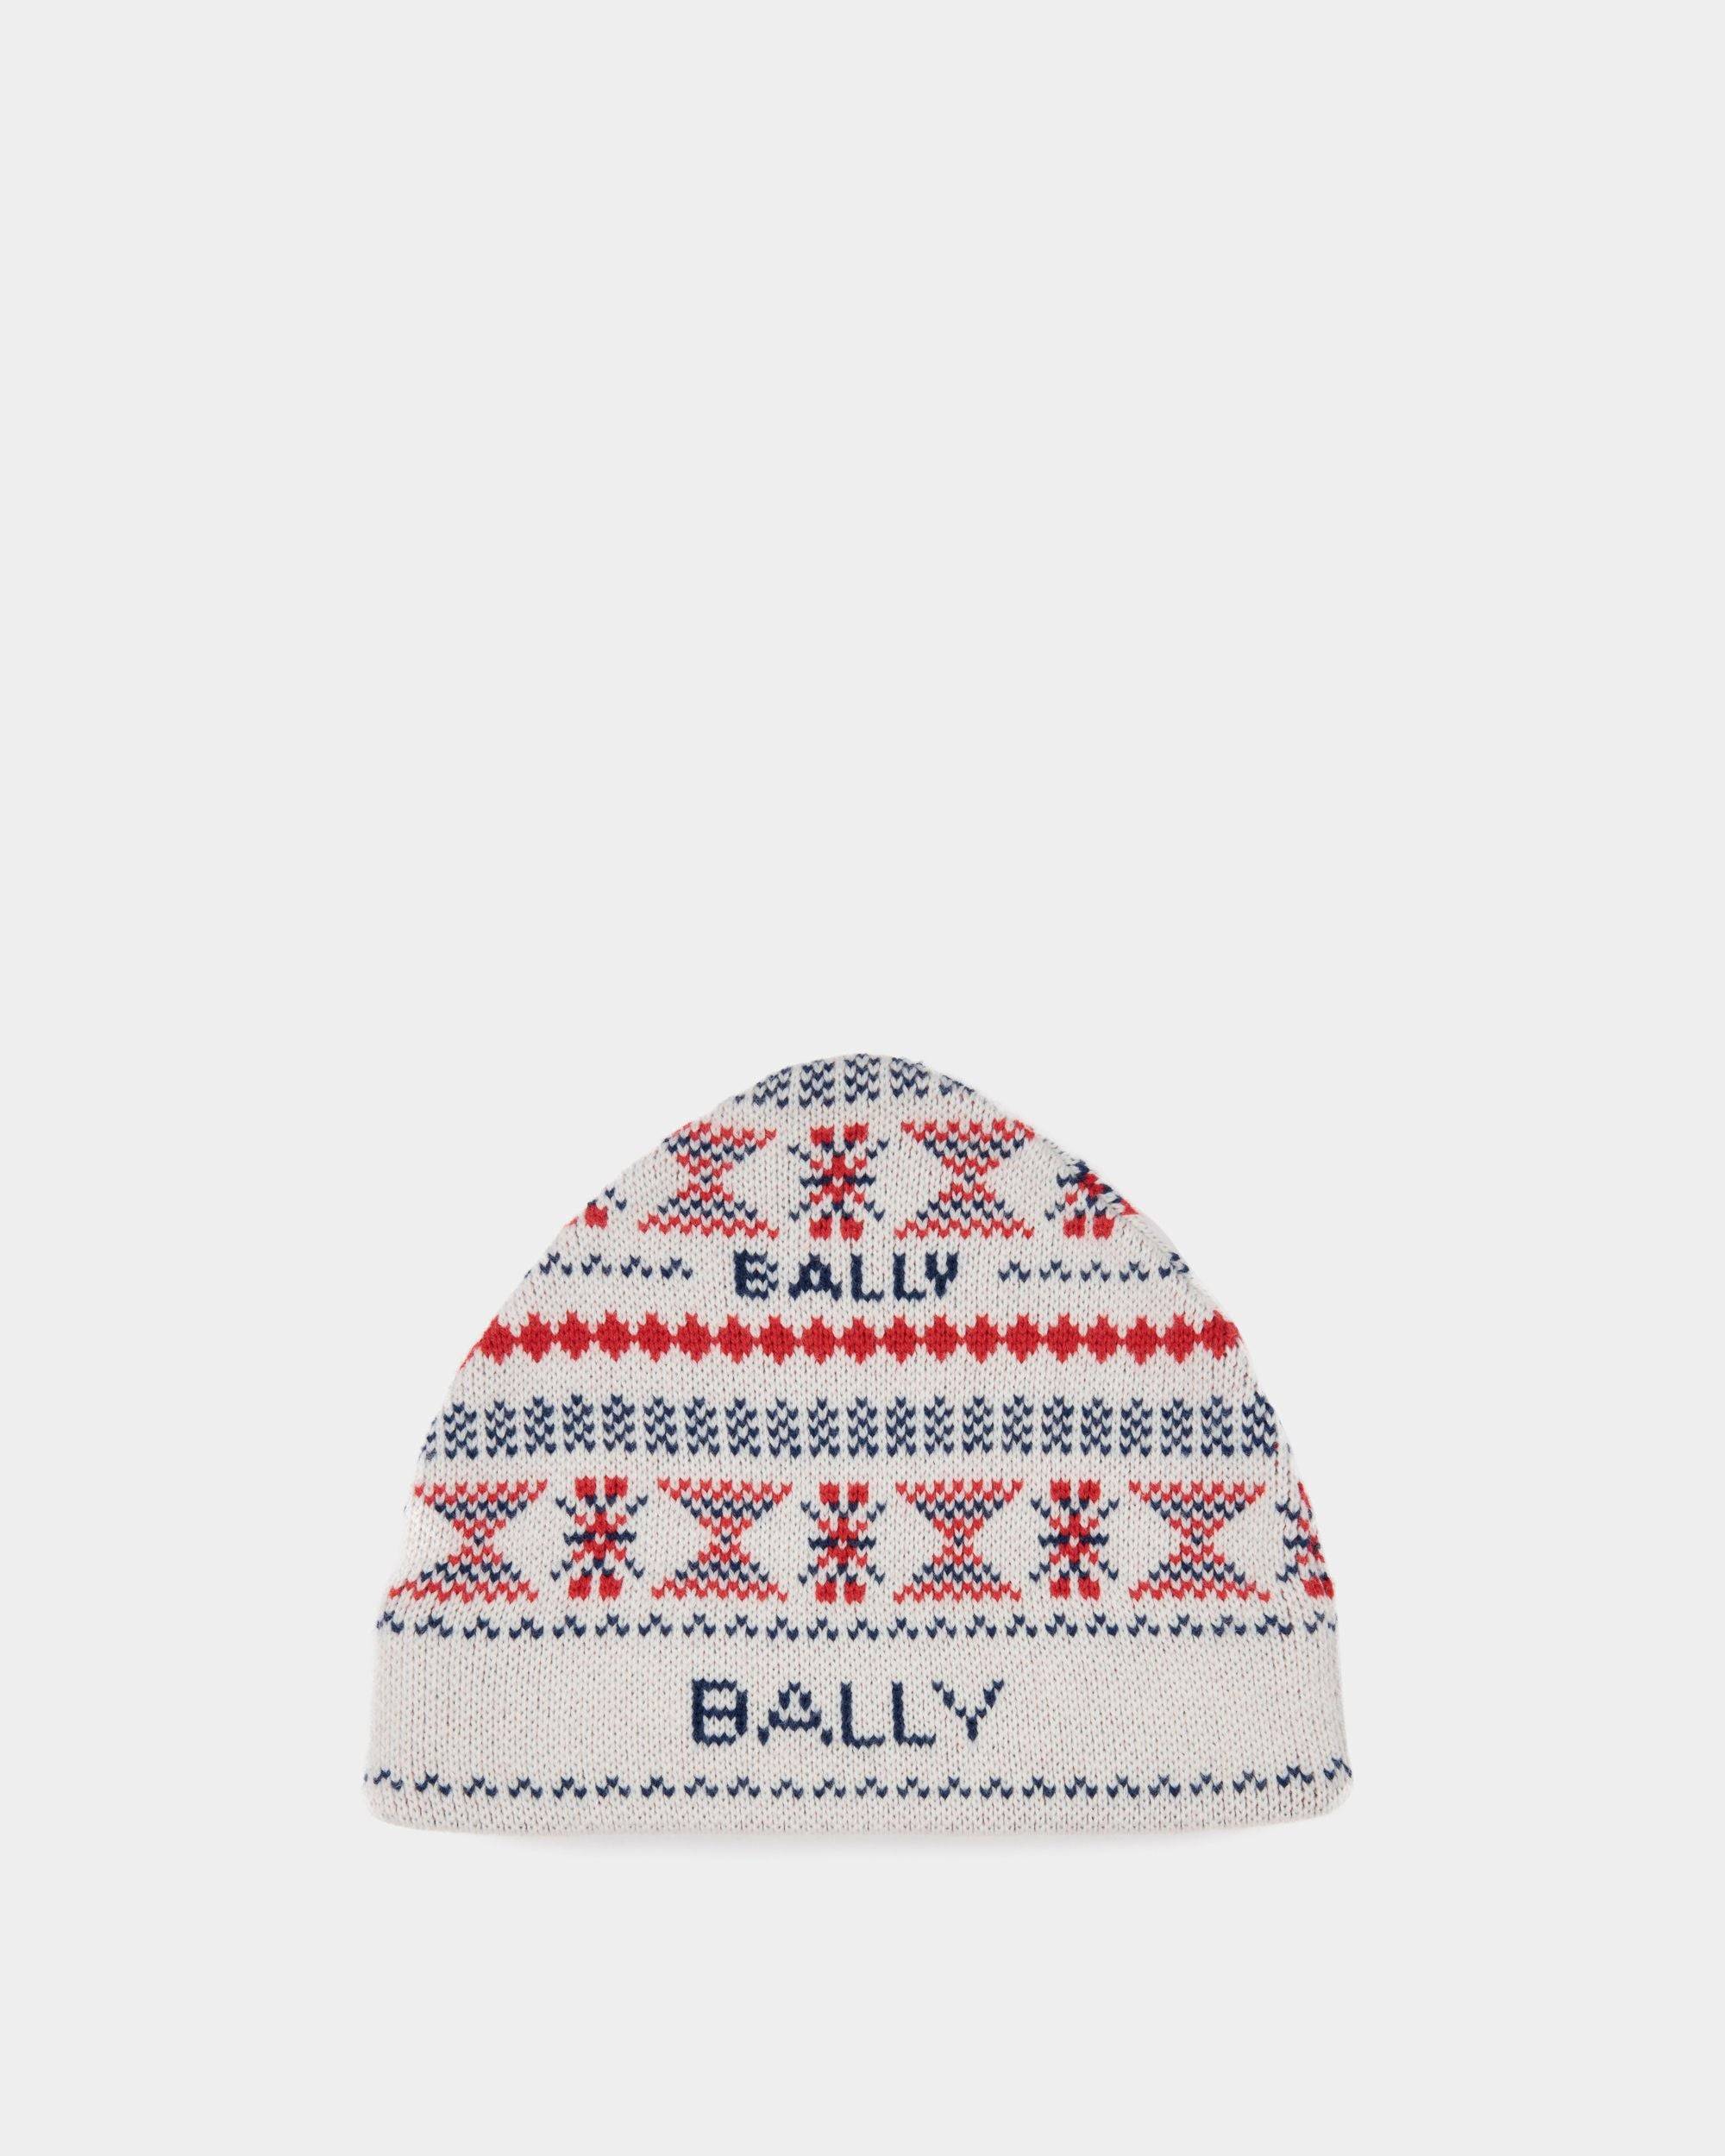 Men's Mountain Multicolor Beanie in Wool | Bally | Still Life Front